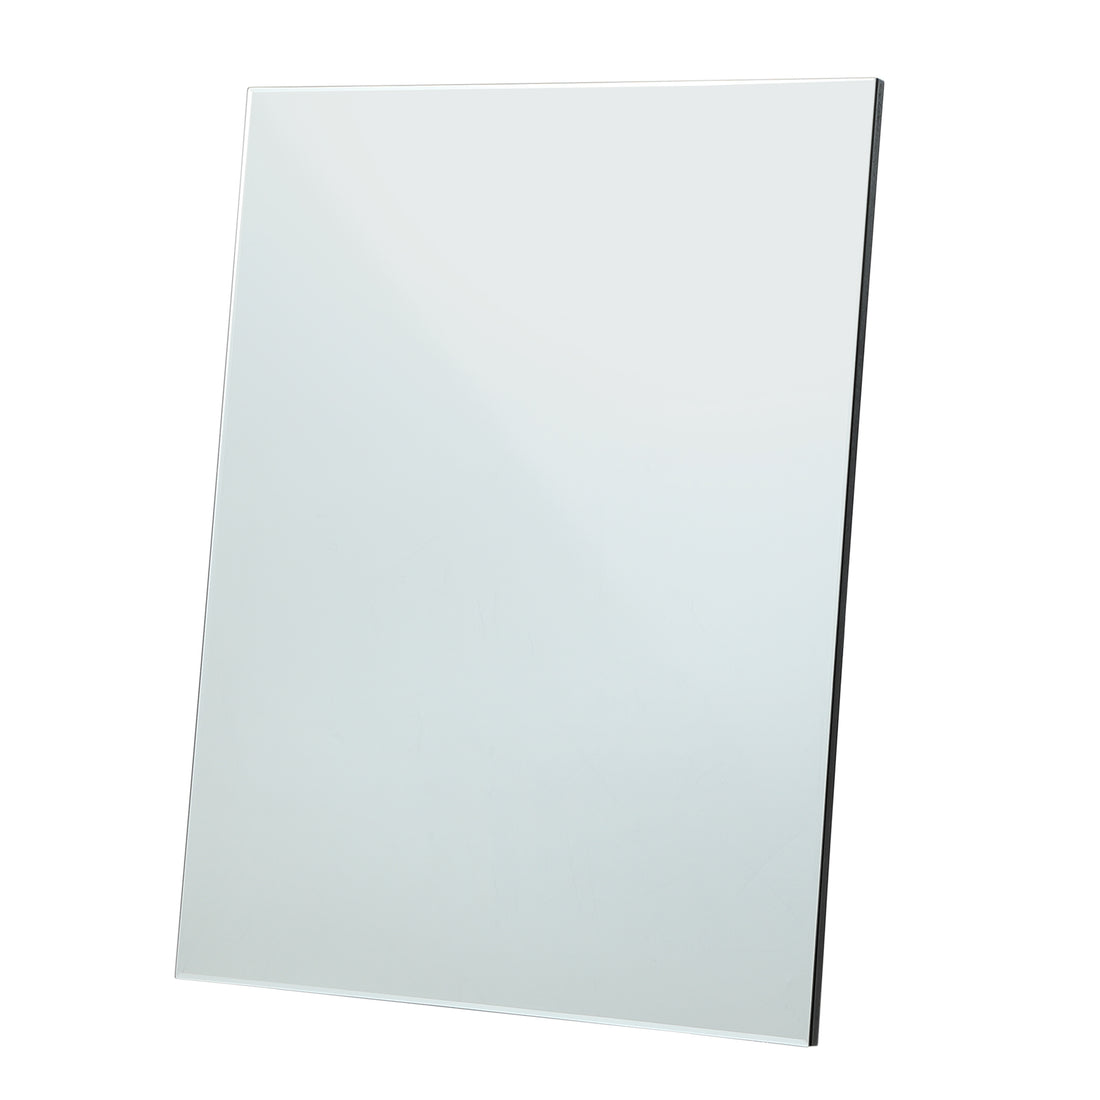 33.07"L x 26.77"W Mirror for Wall, Hanging Mirror for clear-glass